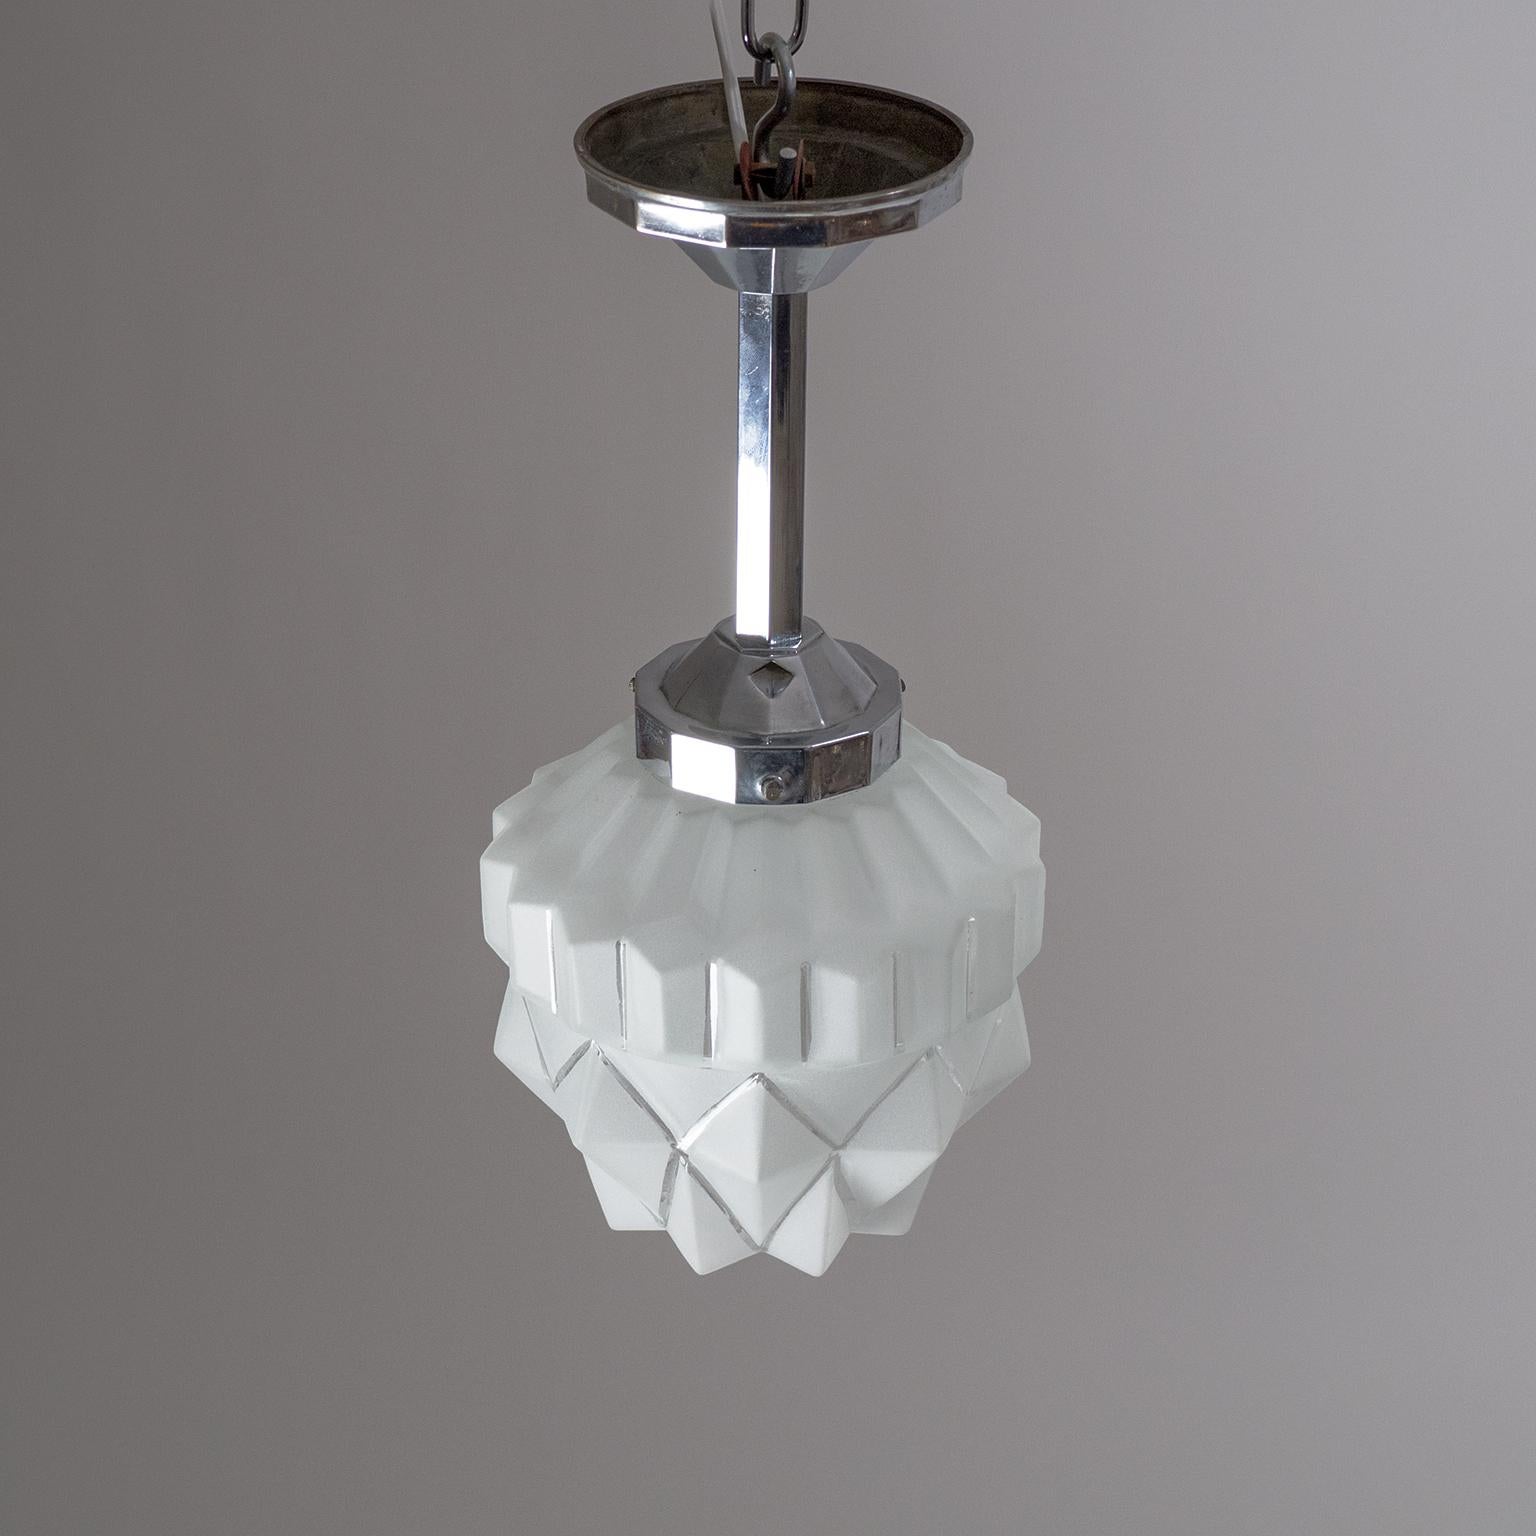 1920s French Art Deco Ceiling Light, Chrome and Frosted Glass 6